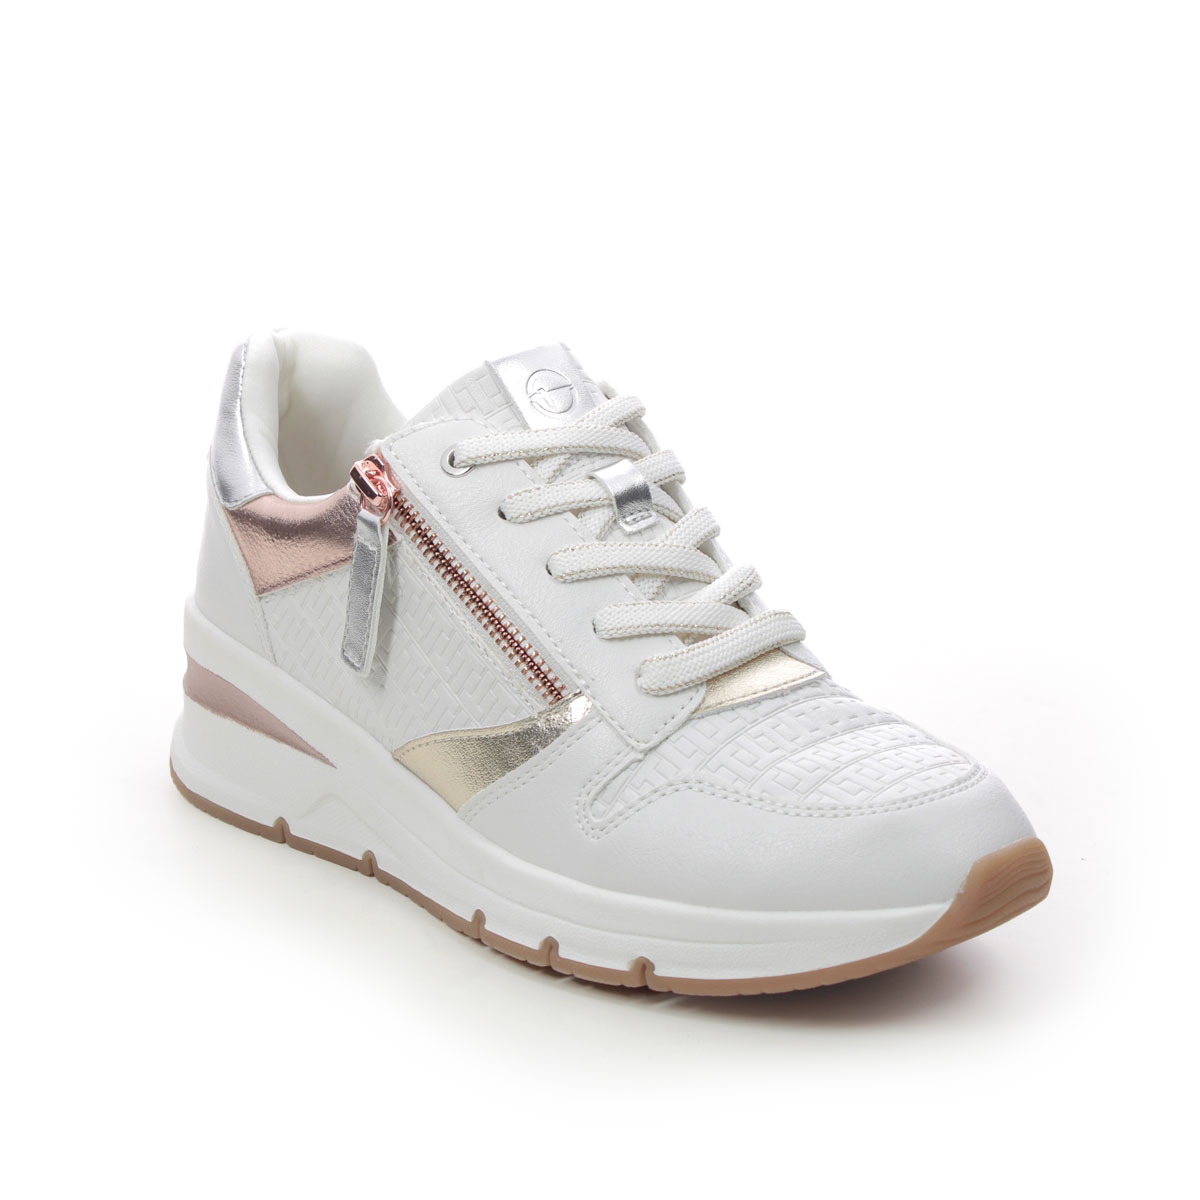 Tamaris Rea Zip Wedge White Rose Gold Womens Trainers 23702-20-157 In Size 40 In Plain White Rose Gold